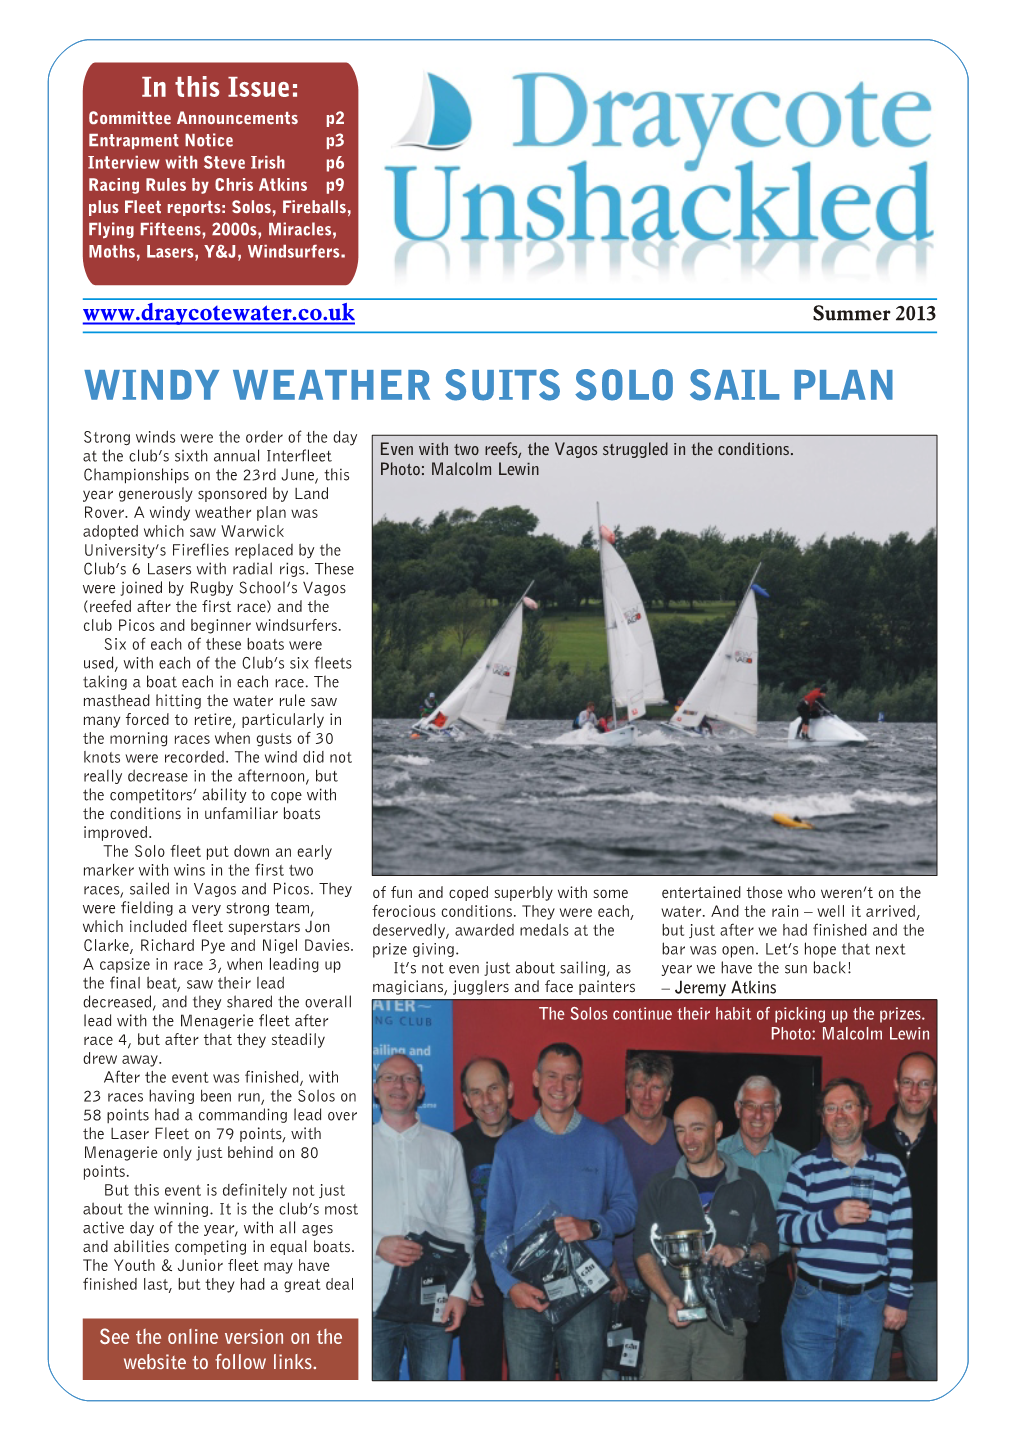 Windy Weather Suits Solo Sail Plan